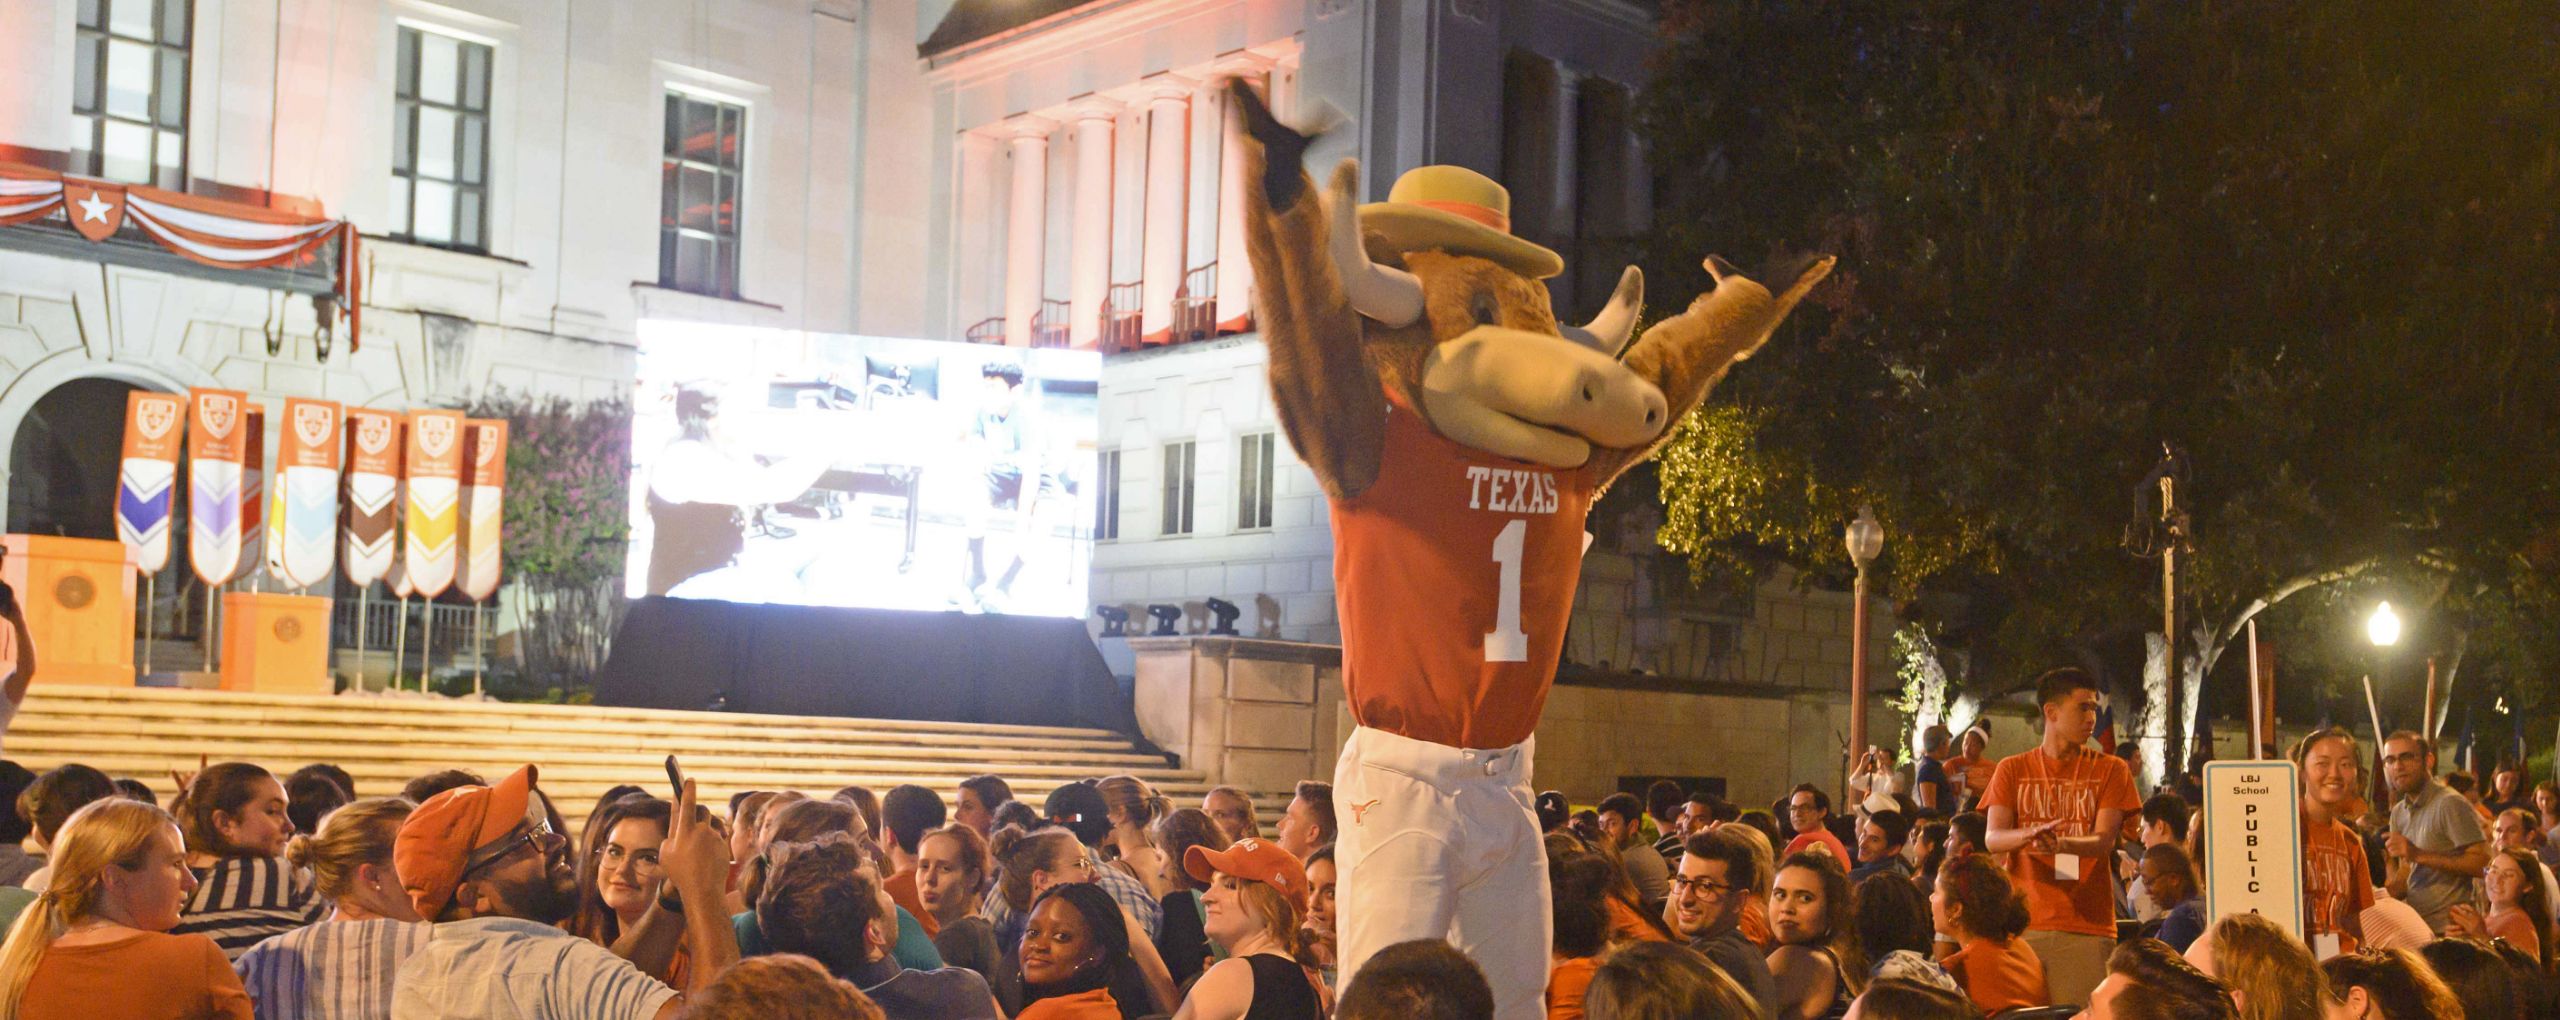 UT mascot, Hook 'em, in crowd at Gone to Texas with both arms raise igniting the crowd